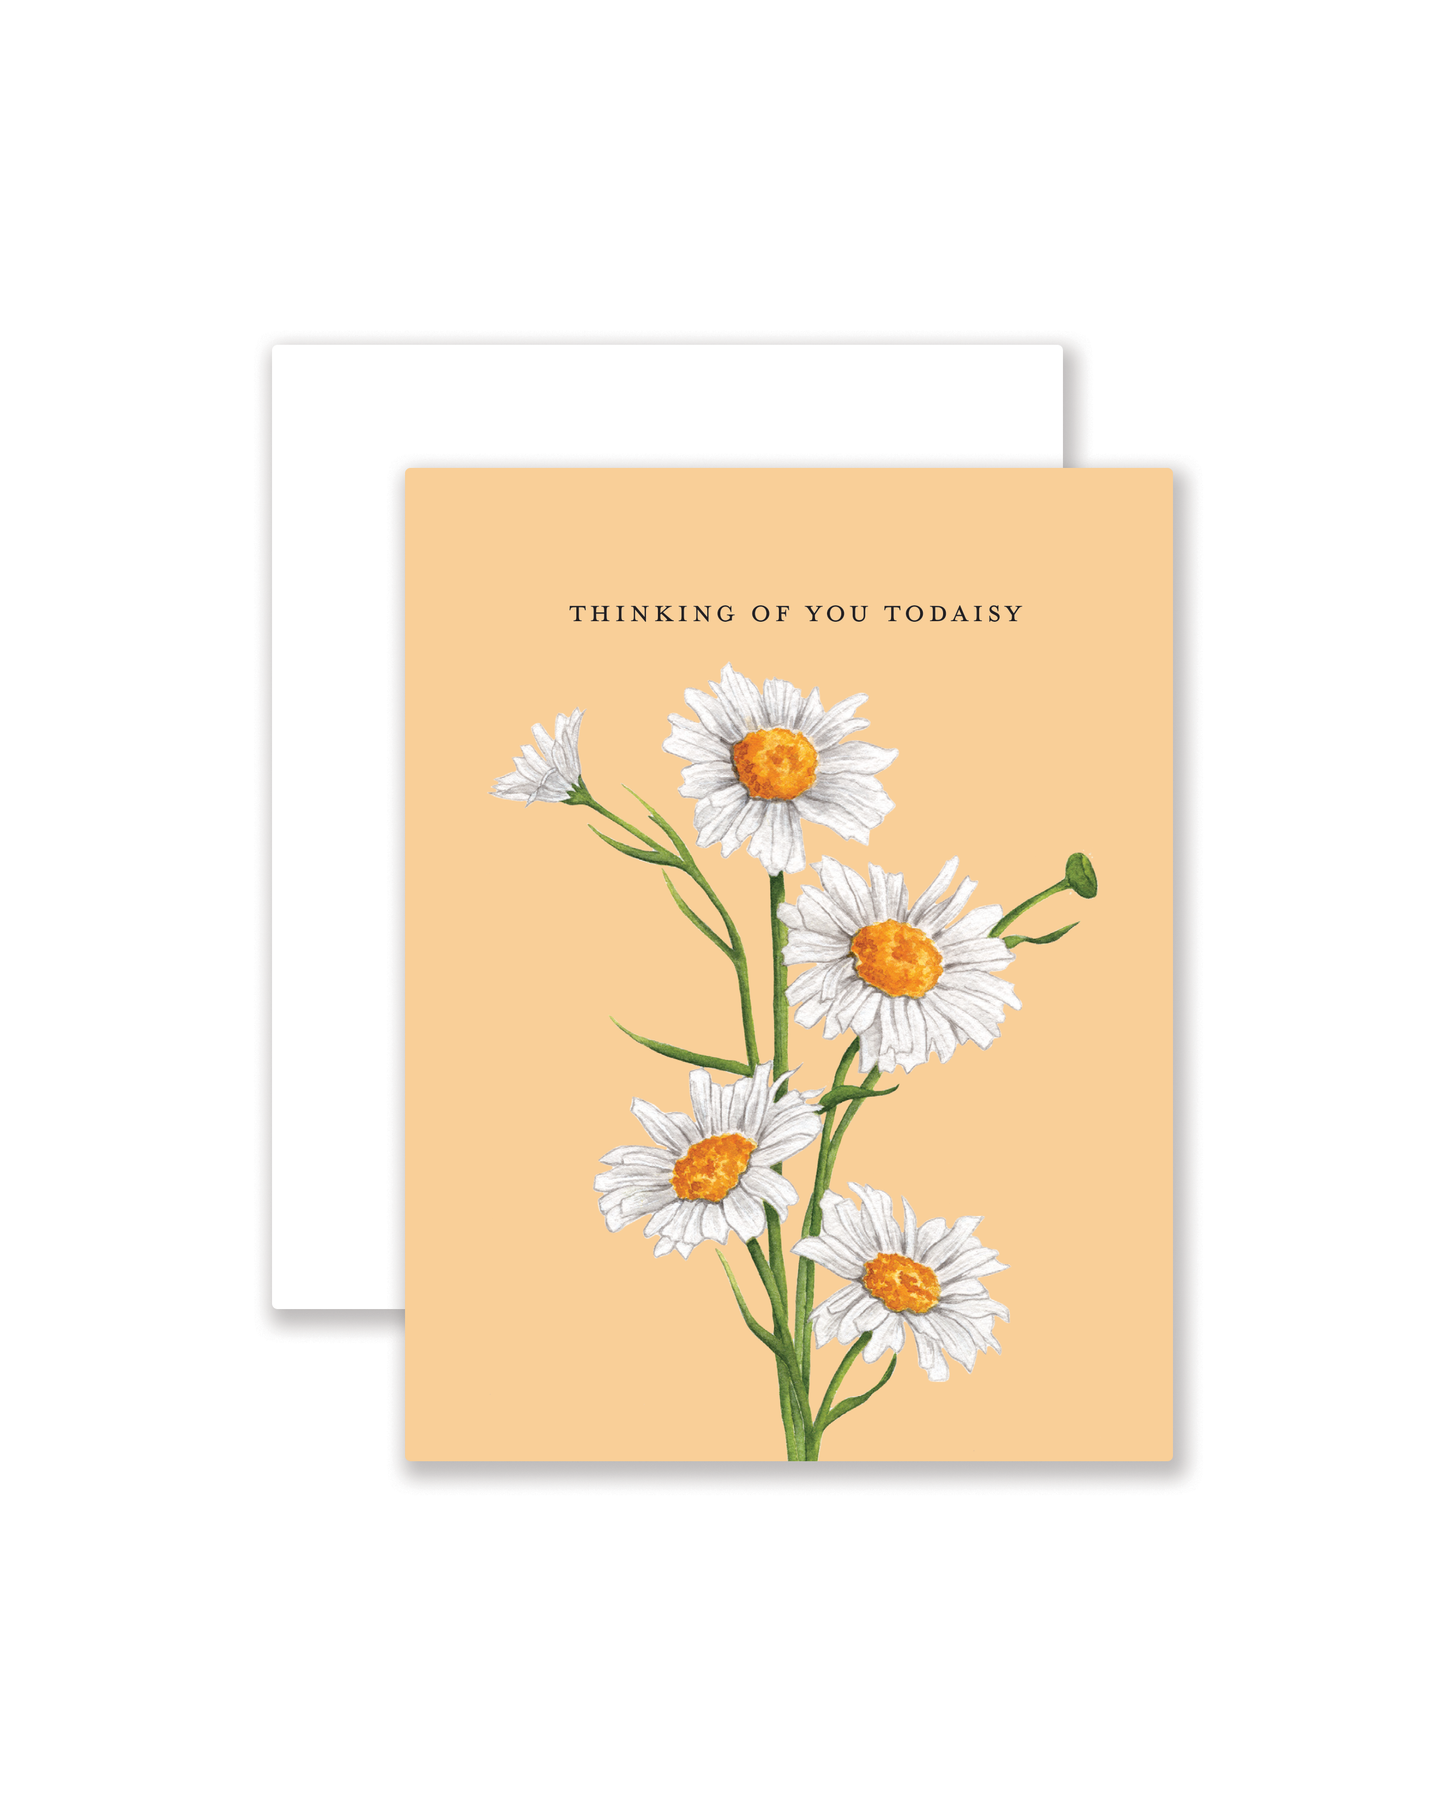 Thinking of You Todaisy Greeting Card